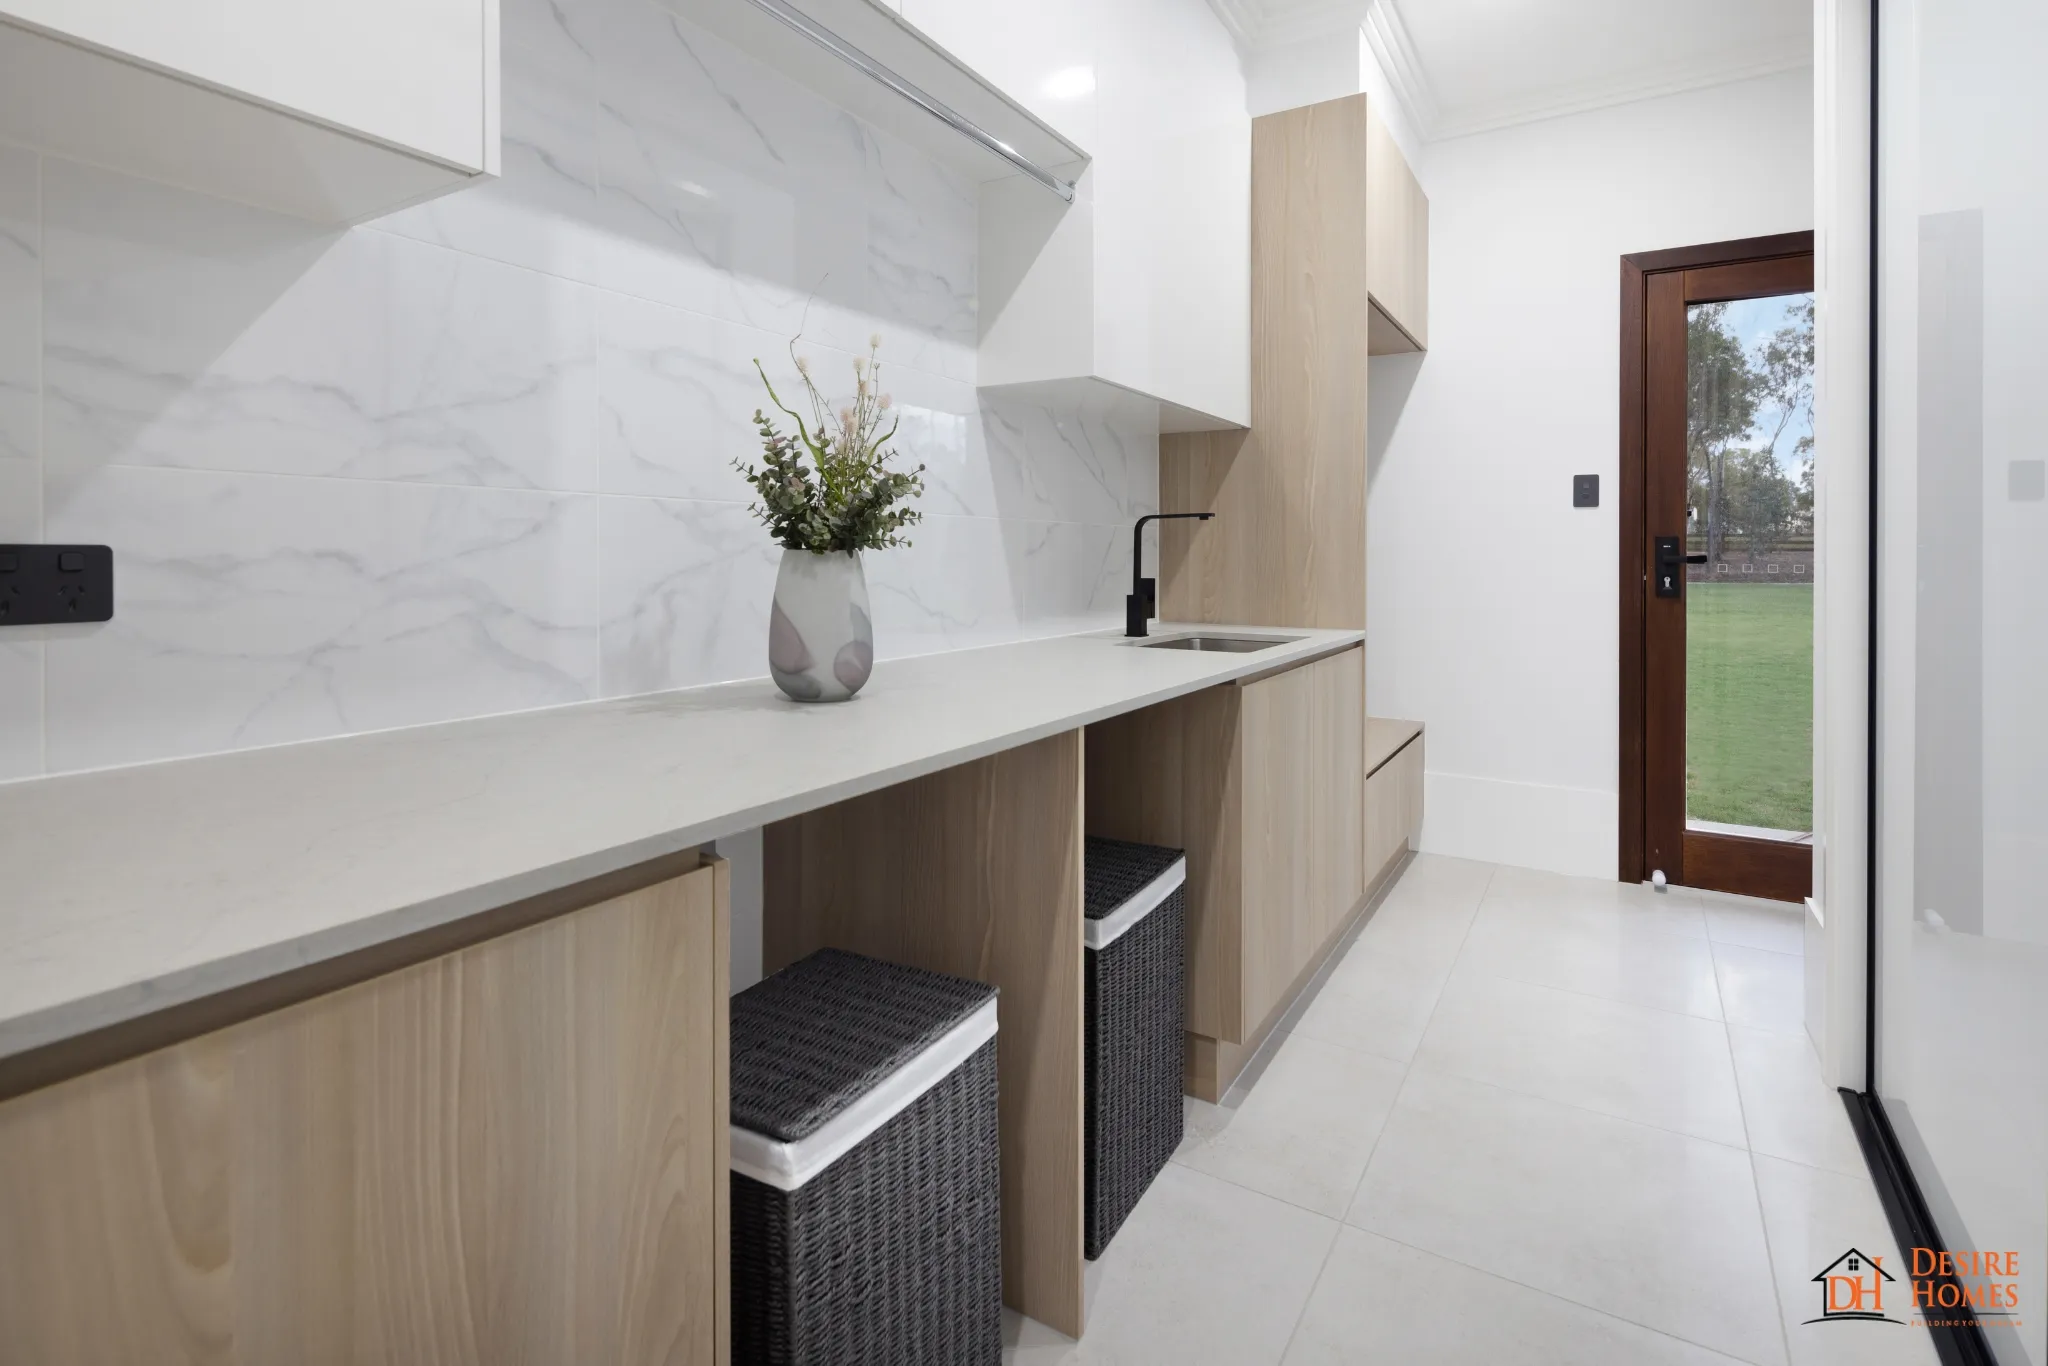 Desire Homes Greenbank Headge Display by Imperial Kitchens - Laundry